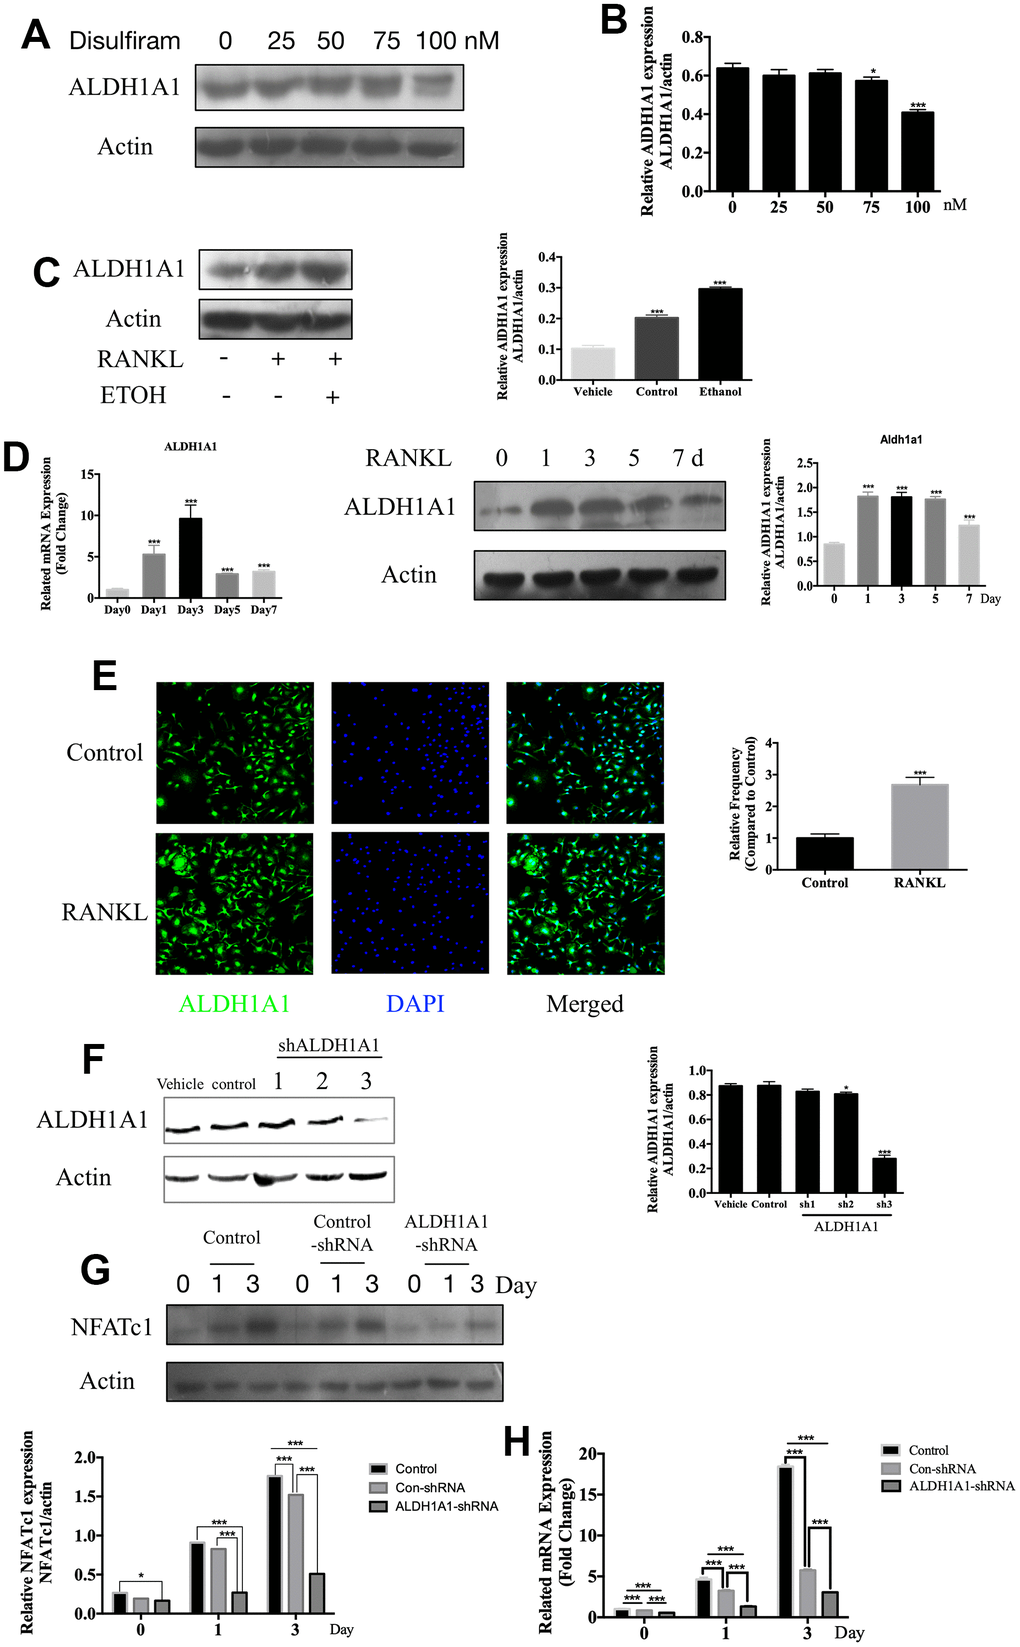 Disulfiram inhibits ethanol-induced osteoclastogenesis via ALDH1A1. (A) Disulfiram inhibited the expression ALDH1A1 in a dose-dependent manner. (B) Relative expression of ALDH1A1 was determined by densitometric analysis of each band and expressed as a ratio to that of β-actin using ImageJ software. (C) Ethanol increased the expression of ALDH1A1. Total cellular proteins were extracted from BMM-derived OCs treated with 100 ng/mL RANKL, with or without ethanol, for 3 days. Relative expression of ALDH1A1 was determined by densitometric analysis of each band and expressed as a ratio to that of β-actin using ImageJ software. (D) qPCR was used to measure the relative levels of ALDH1A1 expression, normalized to those of β-actin, at different times of osteoclastogenesis (n = 3). Values are the mean ± SD. *p p p E) Representative immunofluorescence images of ALDH1A1 from BMMs treated with or without RANKL, showing that RANKL increased ALDH1A1 in the cytoplasm and the nucleus. Nuclei were counterstained with DAPI (blue). (F) Efficiency of ALDH1A1 silencing was determined by immunoblot analysis. Relative expression of ALDH1A1 was determined by densitometric analysis of each band and expressed as a ratio to that of β-actin using ImageJ software. (G) Silencing of ALDH1A1 decreased the expression of NFATc1. Total cellular proteins were extracted from RAW 264.7 cells and RAW 264.7 cells transfected with Lenti-ALDH1A1 or Lenti-NC, after co-treatment with RANKL for 0, 1, and 3 days. (H) qPCR was used to measure the relative expression levels of ALDH1A1, normalized to those of β-actin (n = 3). Values are the mean ± SD. *p p p 